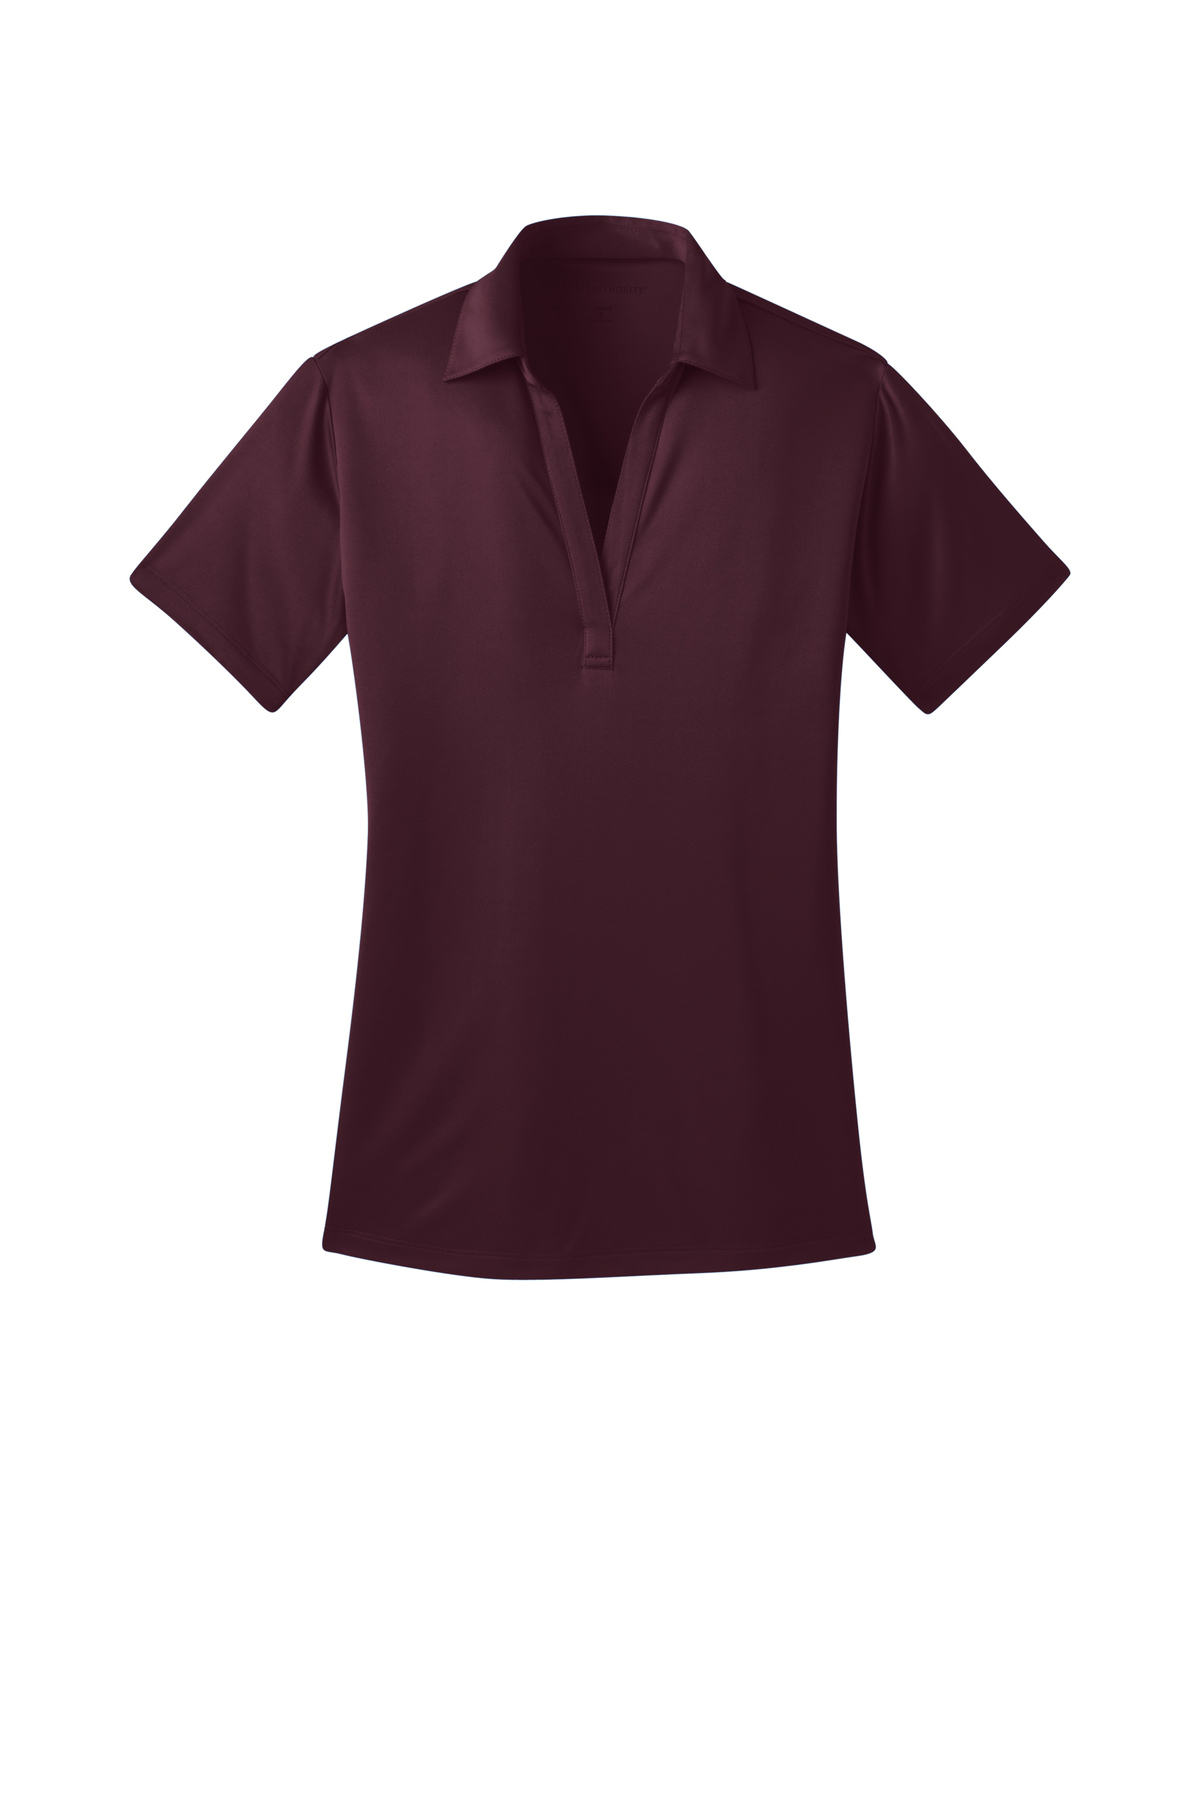 L540 Port Authority Performance Polo